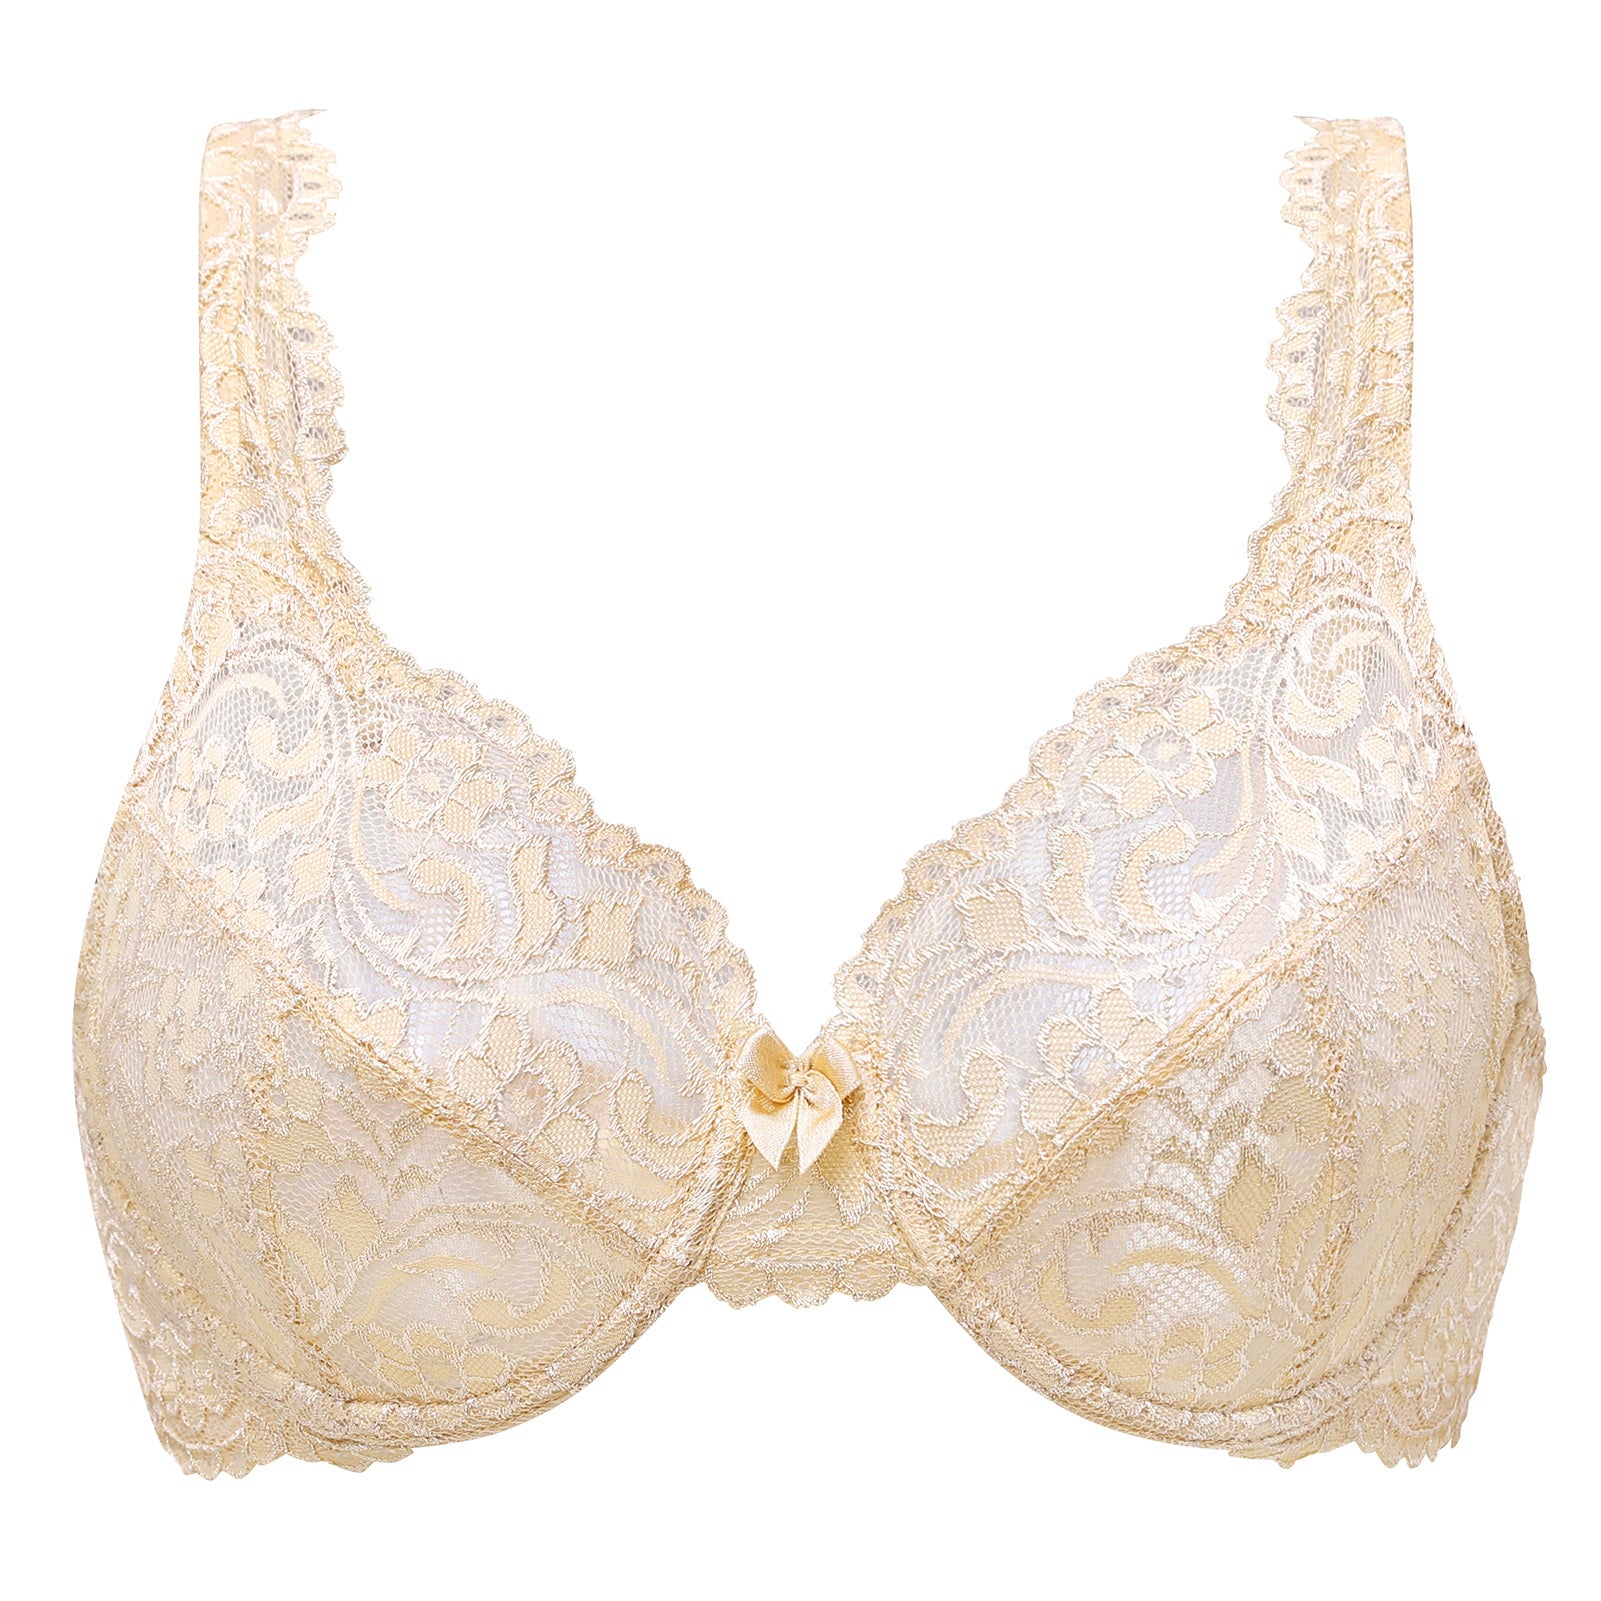  Womens Full Coverage Floral Underwire Non Padded Lace Bra  Plus Size Lingerie 46-D Beige